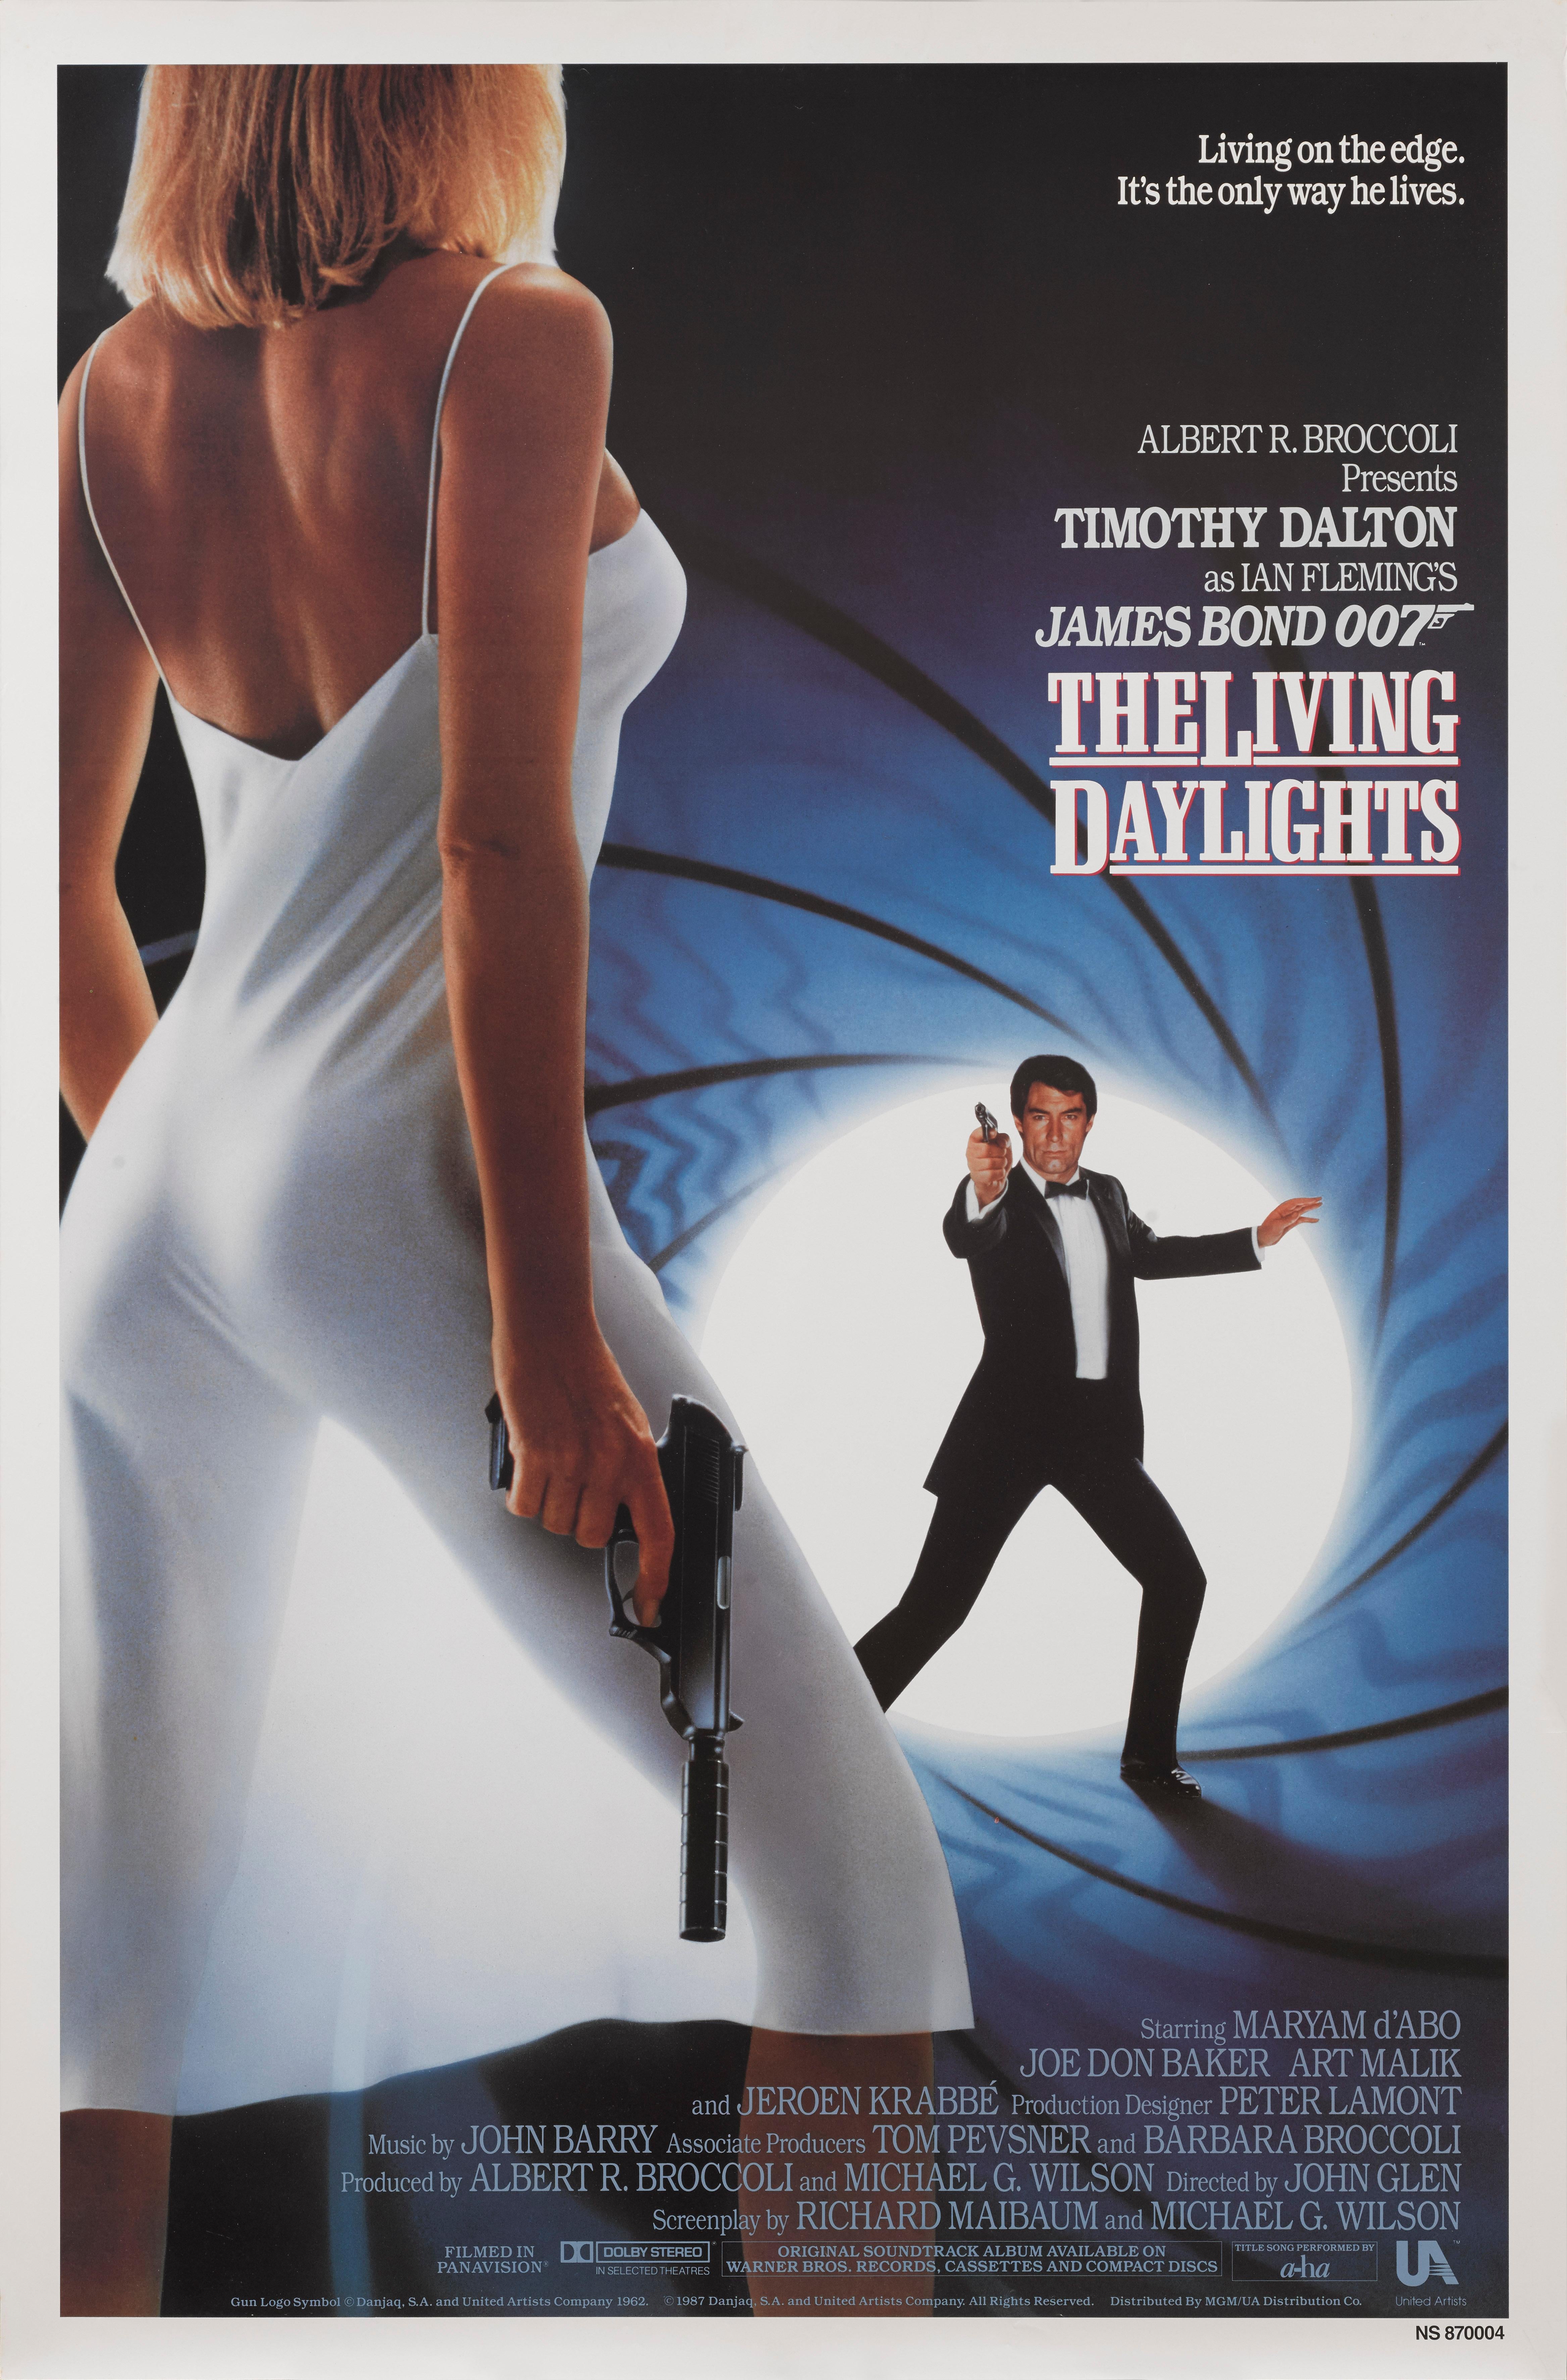 Original US film poster for the 1987 Bond film The Living Daylights, directed by John Glen and starring Timothy Dalton. This poster is unfolded and in near mint condition.
It would be shipped rolled in a very strong tube.